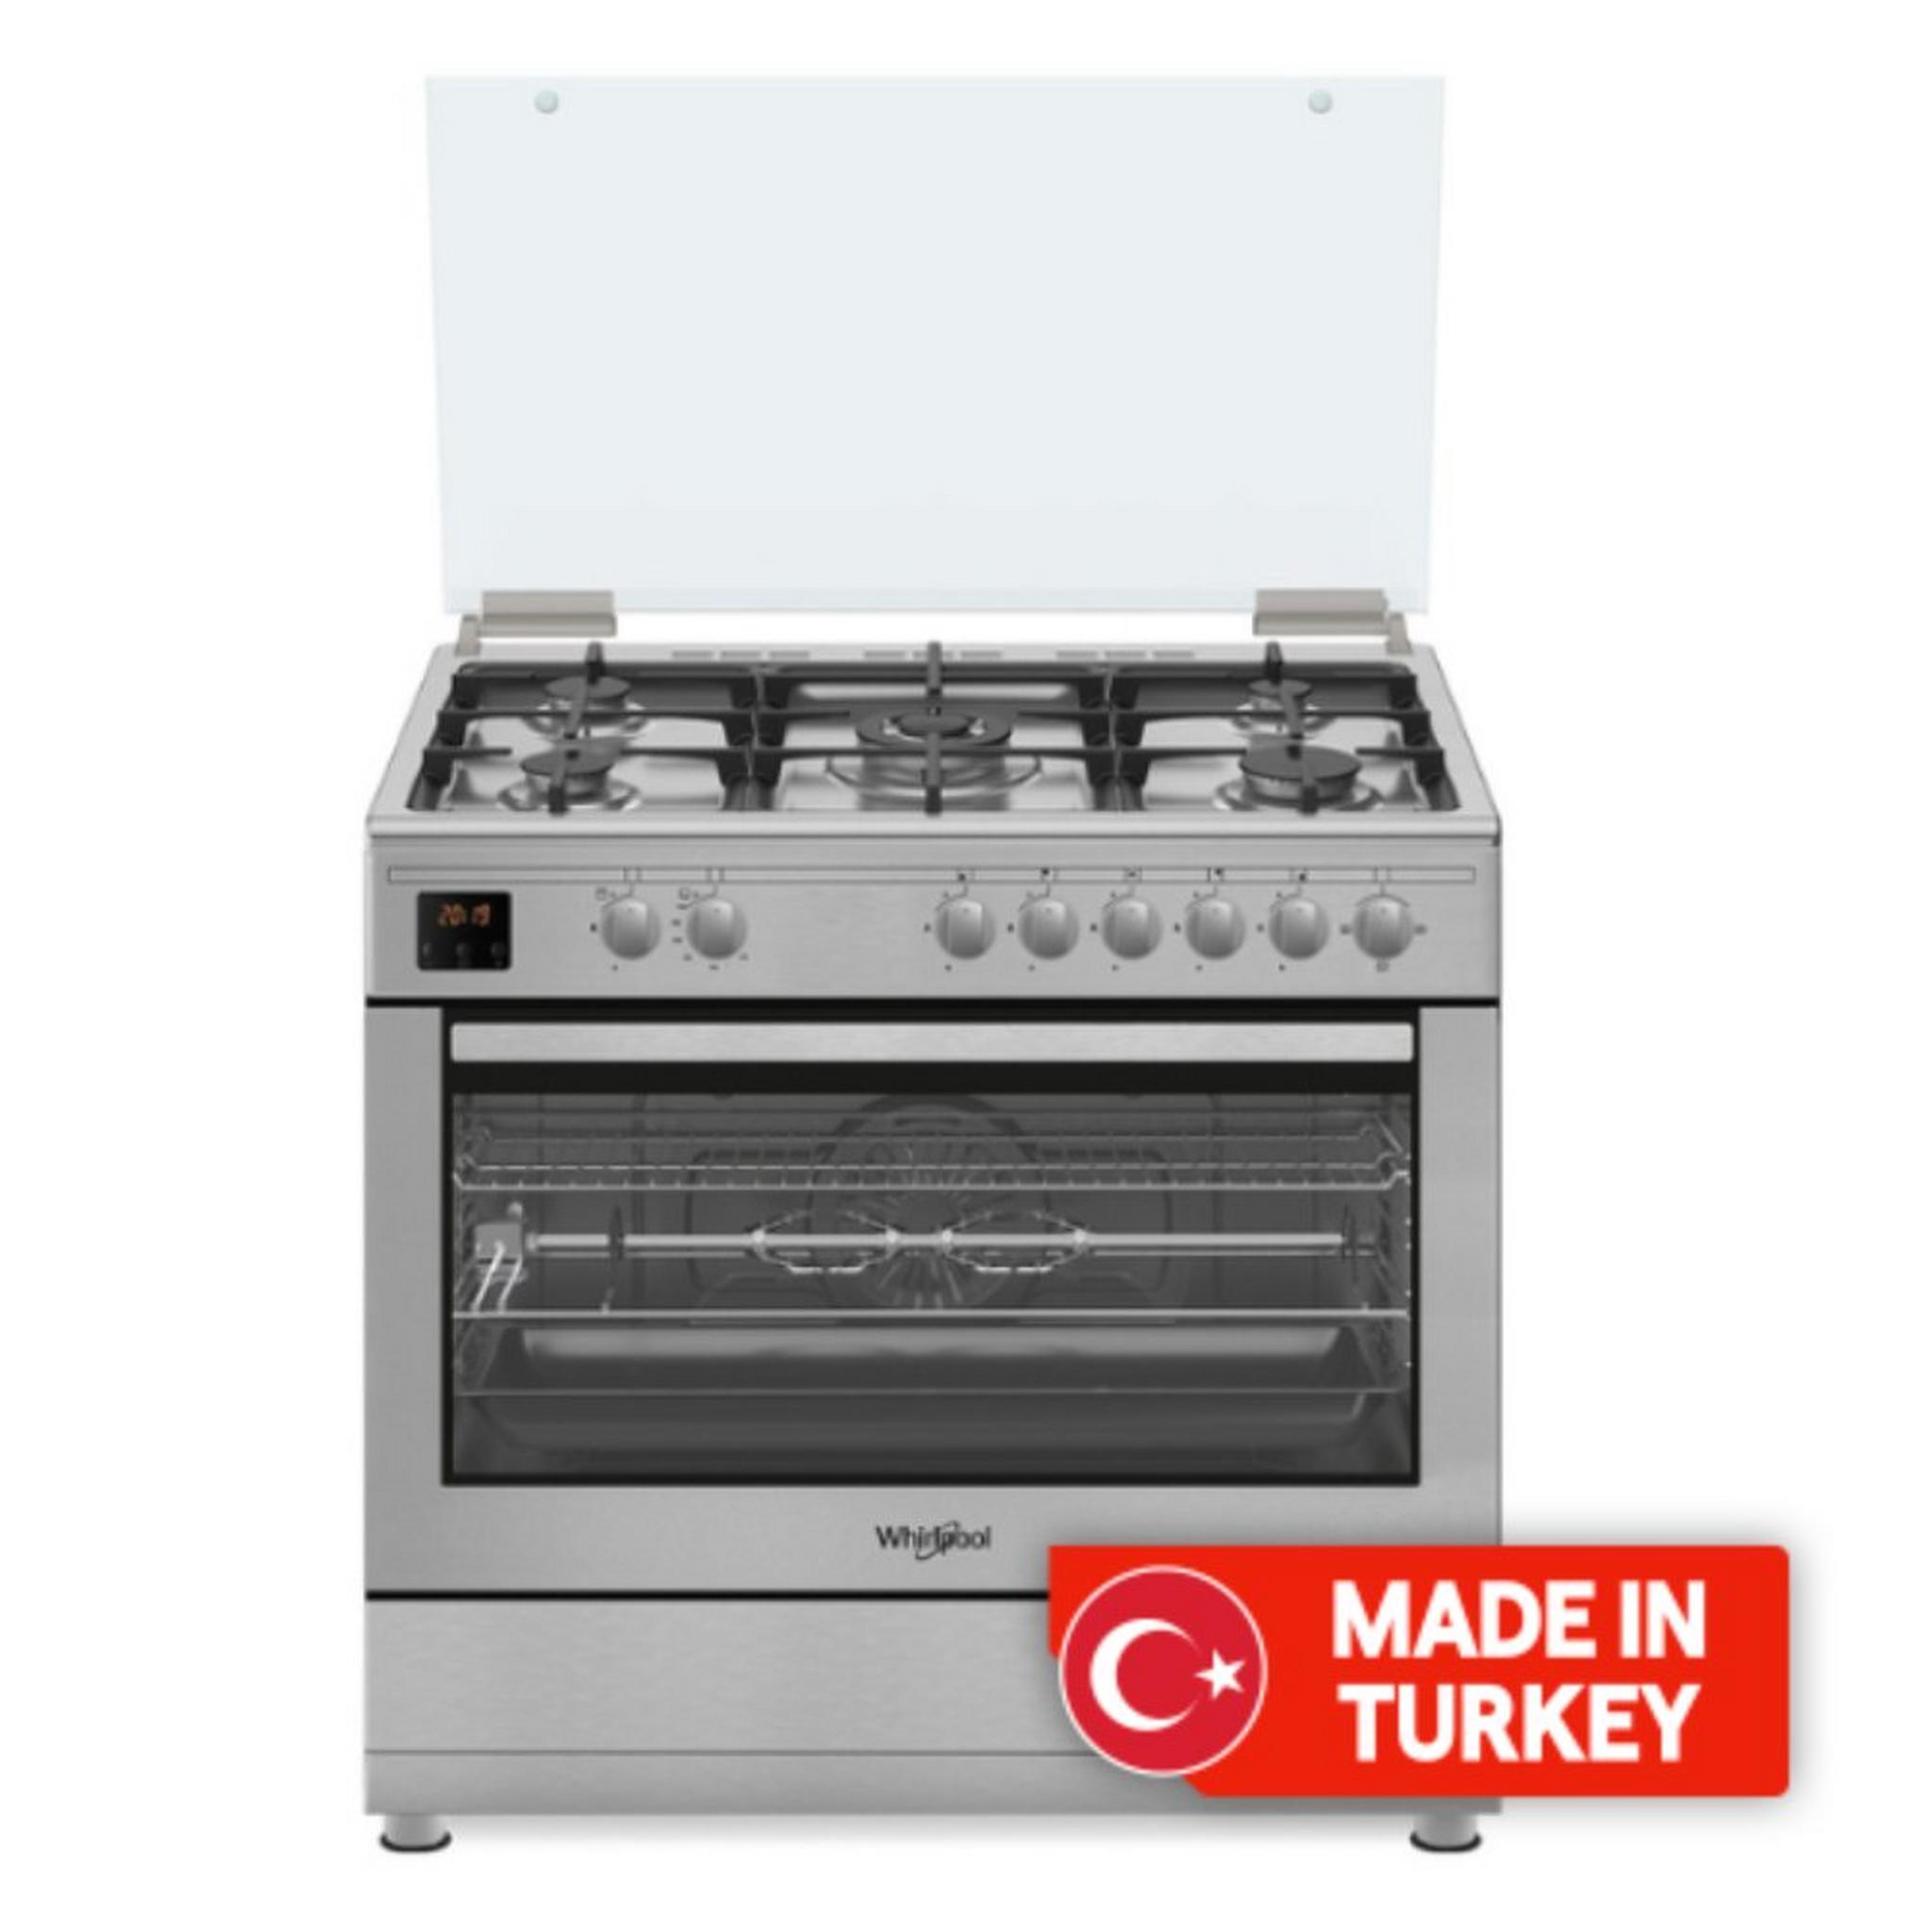 Whirlpool 5 Burners Gas Cooker, 90X60cm, WM9GC6DCX/MEA - Stainless Steel